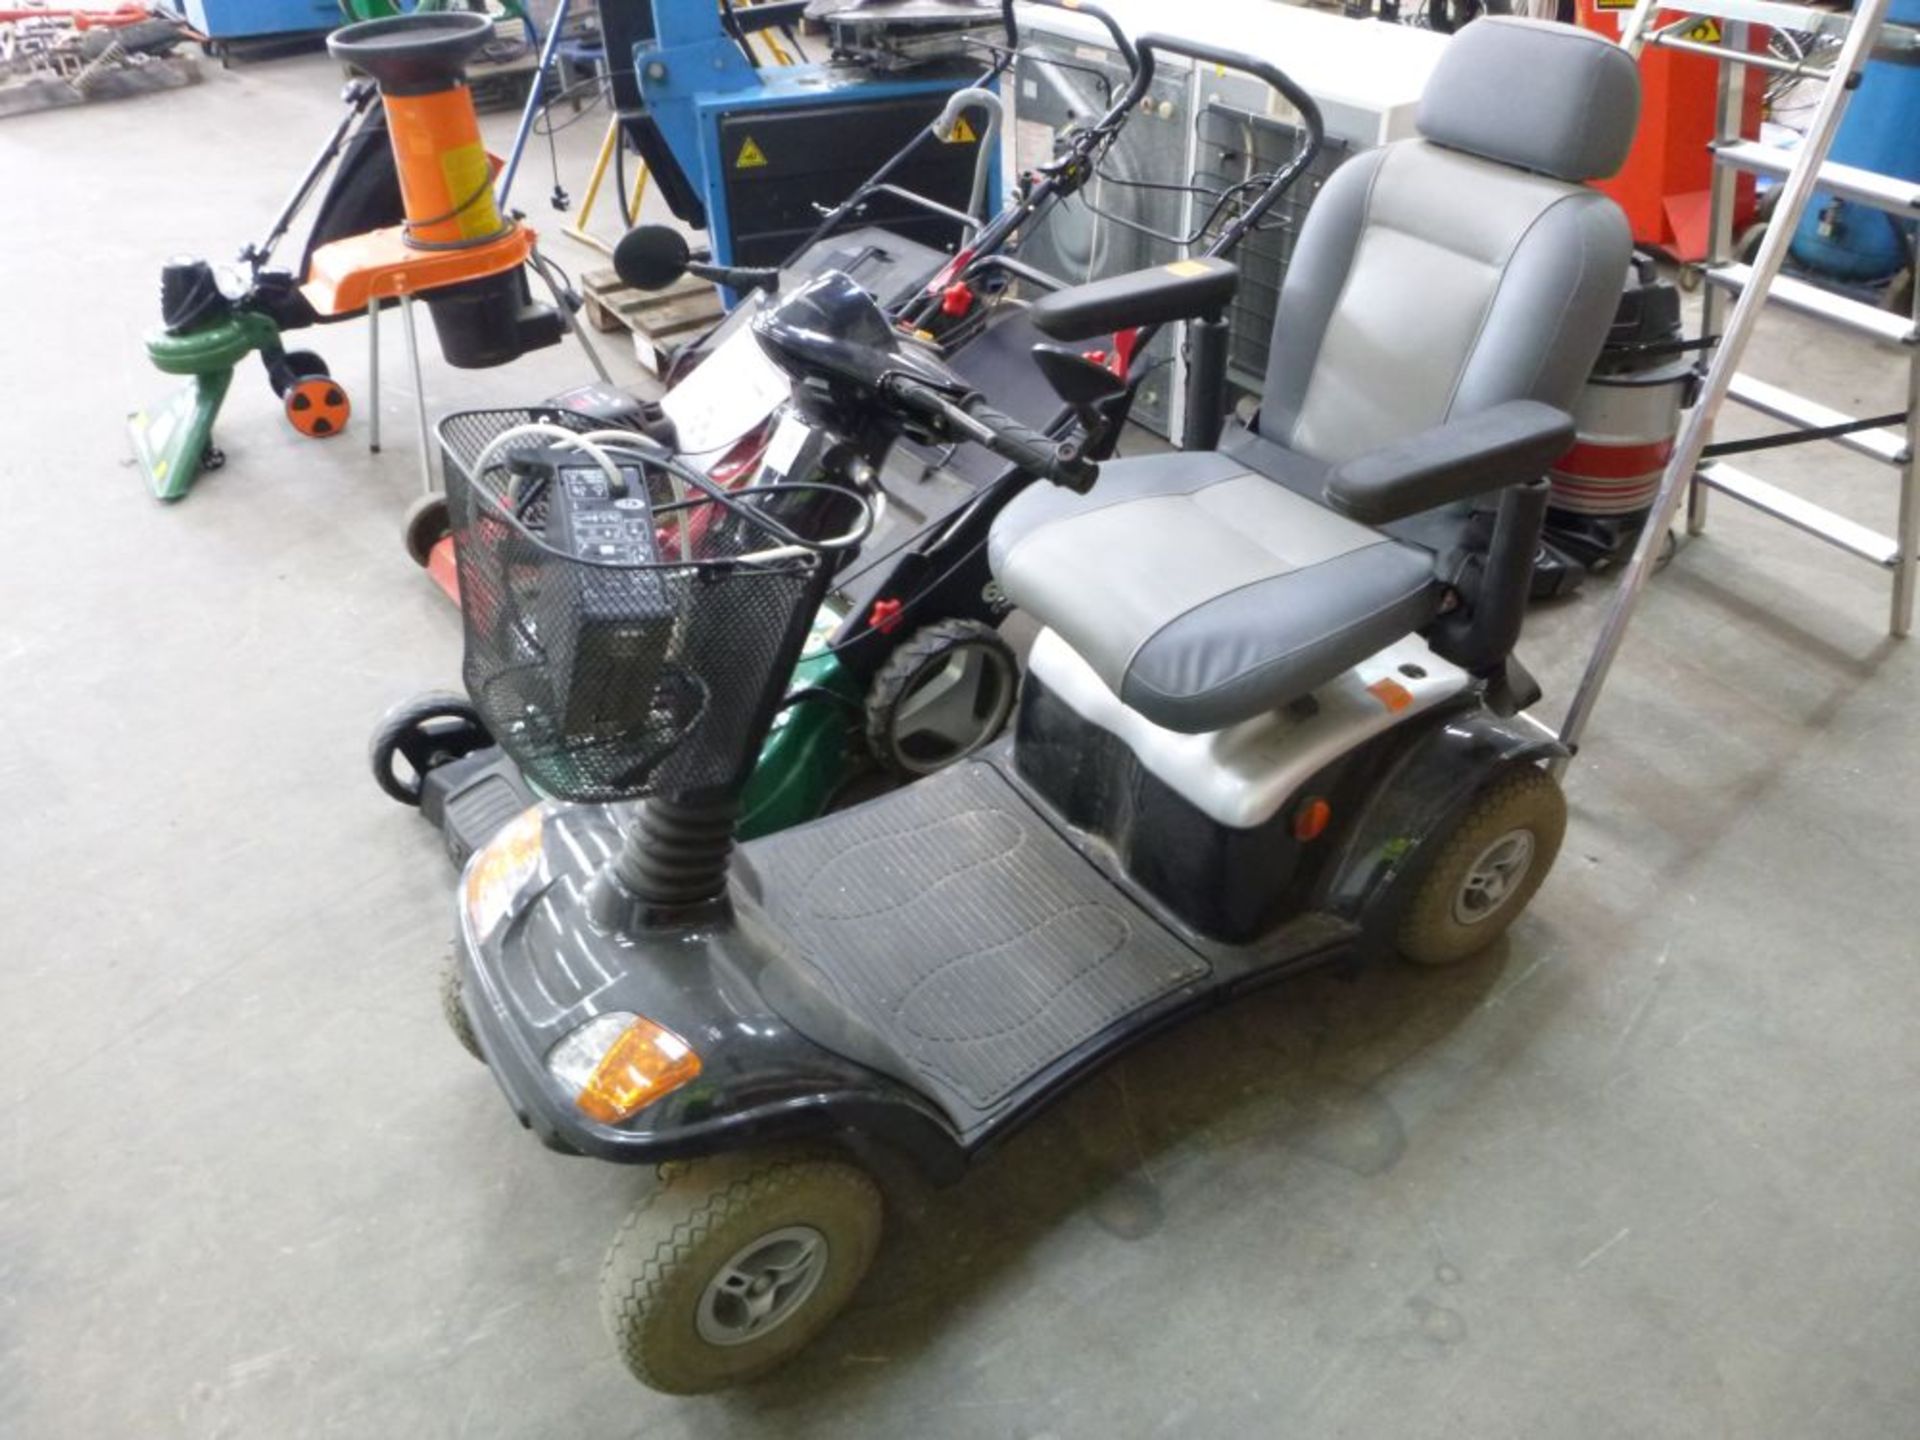 A Kymco Mobility Scooter rated at 8 MPH complete with Charger. Please note there is a £5 plus VAT